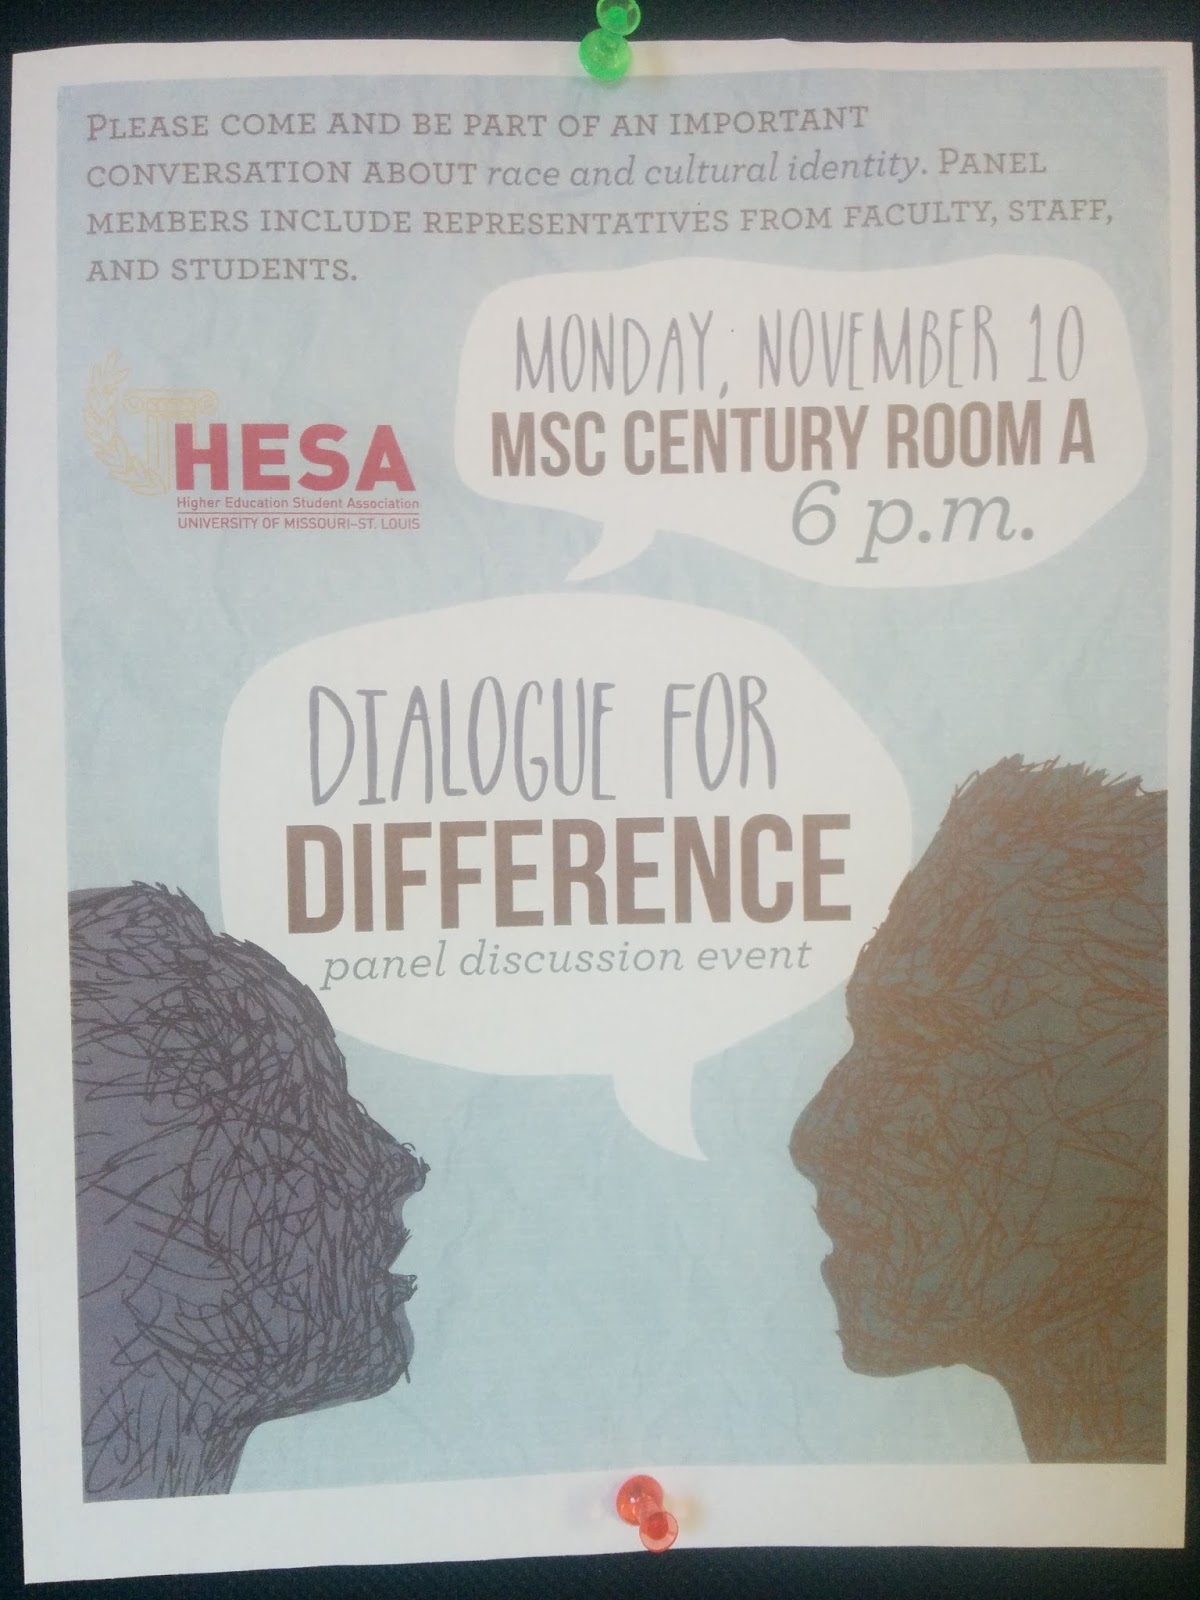 Photograph of a flyer for a campus event entitled 'Dialogue for Difference.' It features two shaded profiles of faces with their mouths open and word bubbles representing a conversation. The text shares the date and place of the panel discussion, and it also states, 'Please come and be part of an important conversation about race and cultural identity. Panel members include representatives from faculty, staff, and students.'